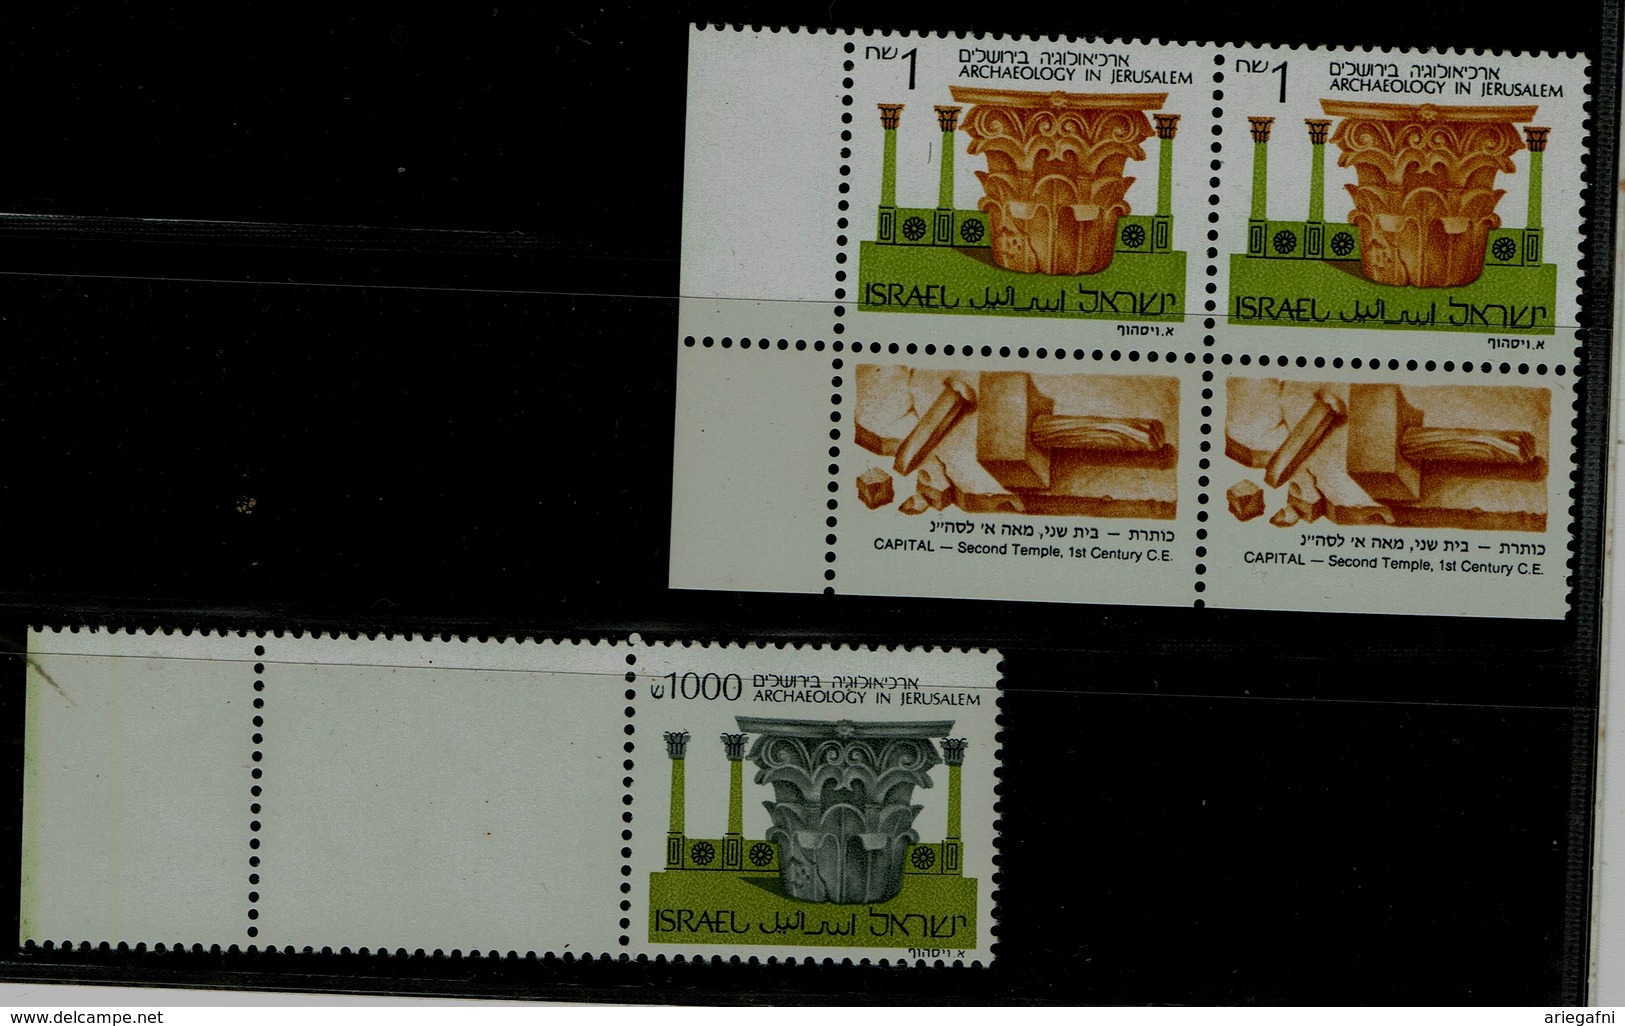 ISRAEL  1986 ARCHEOLOGY ERRORS!! THIS STAMP HAS THREE DIFFERENT ERRORS. 1 COLOR OTHER 2 IN NOMINAL IN PLACE 1 NIS 1,000 - Non Dentellati, Prove E Varietà